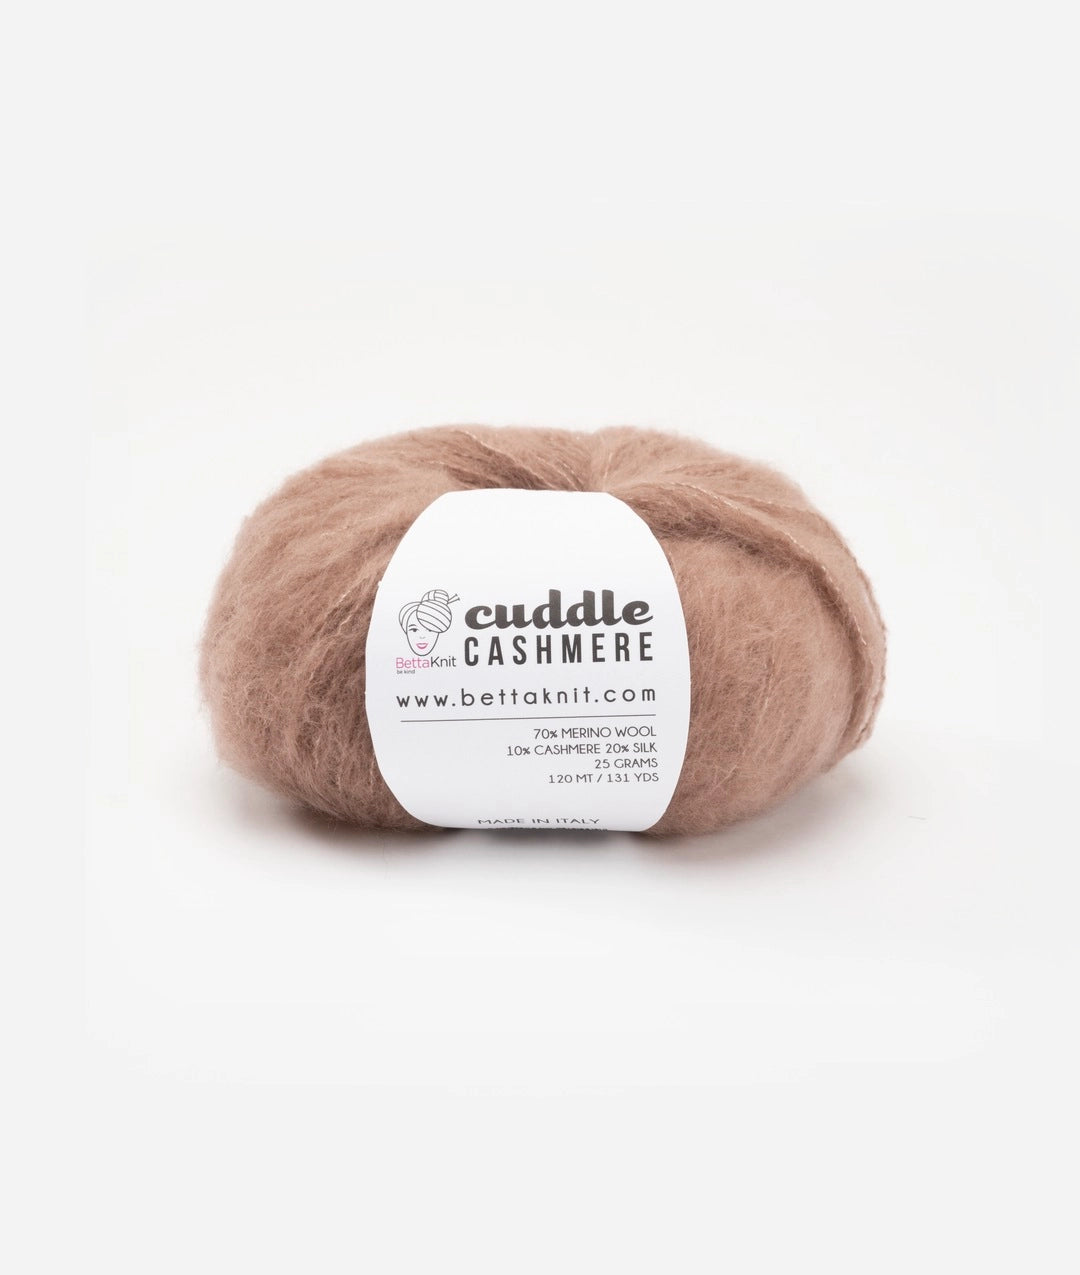 Cuddle Cashmere - Soft and Very Warm Cashmere